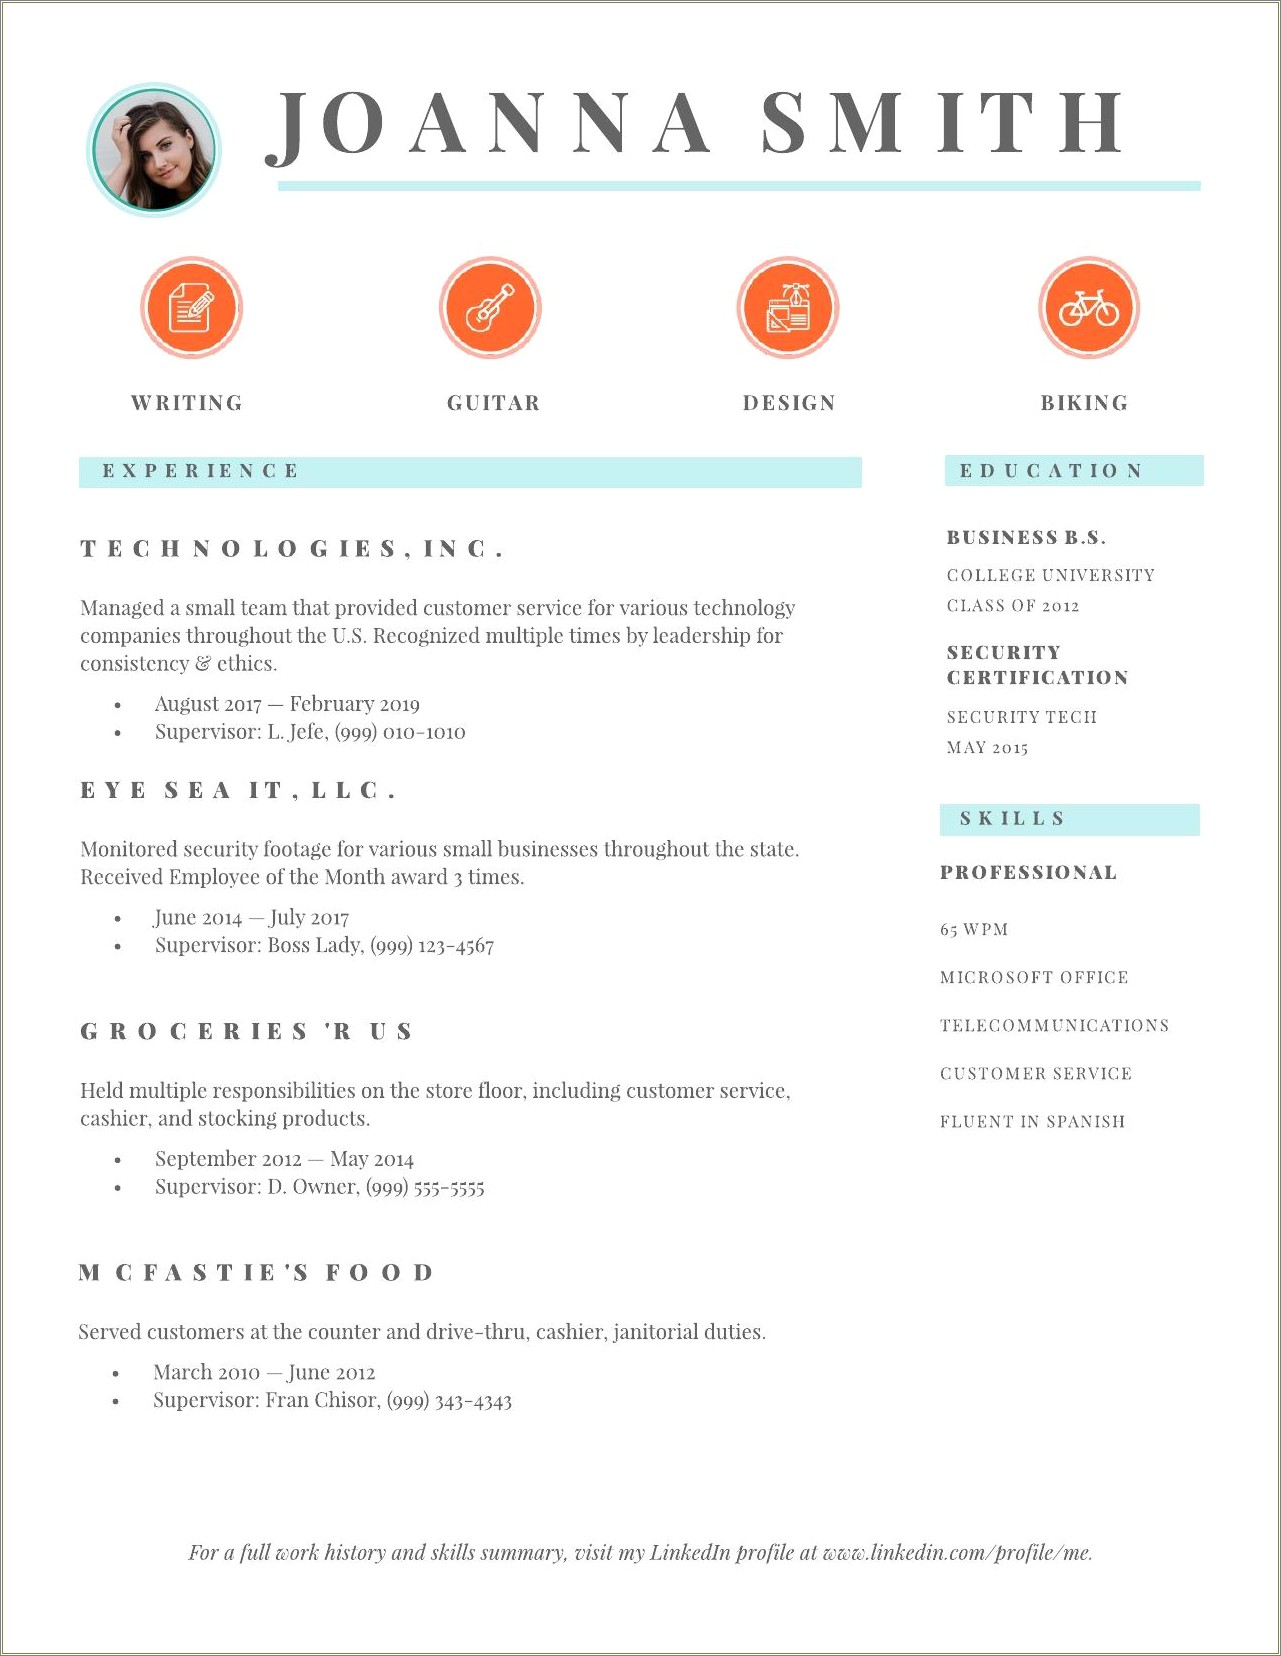 Examples Of Good Resumes And Bad Resumes